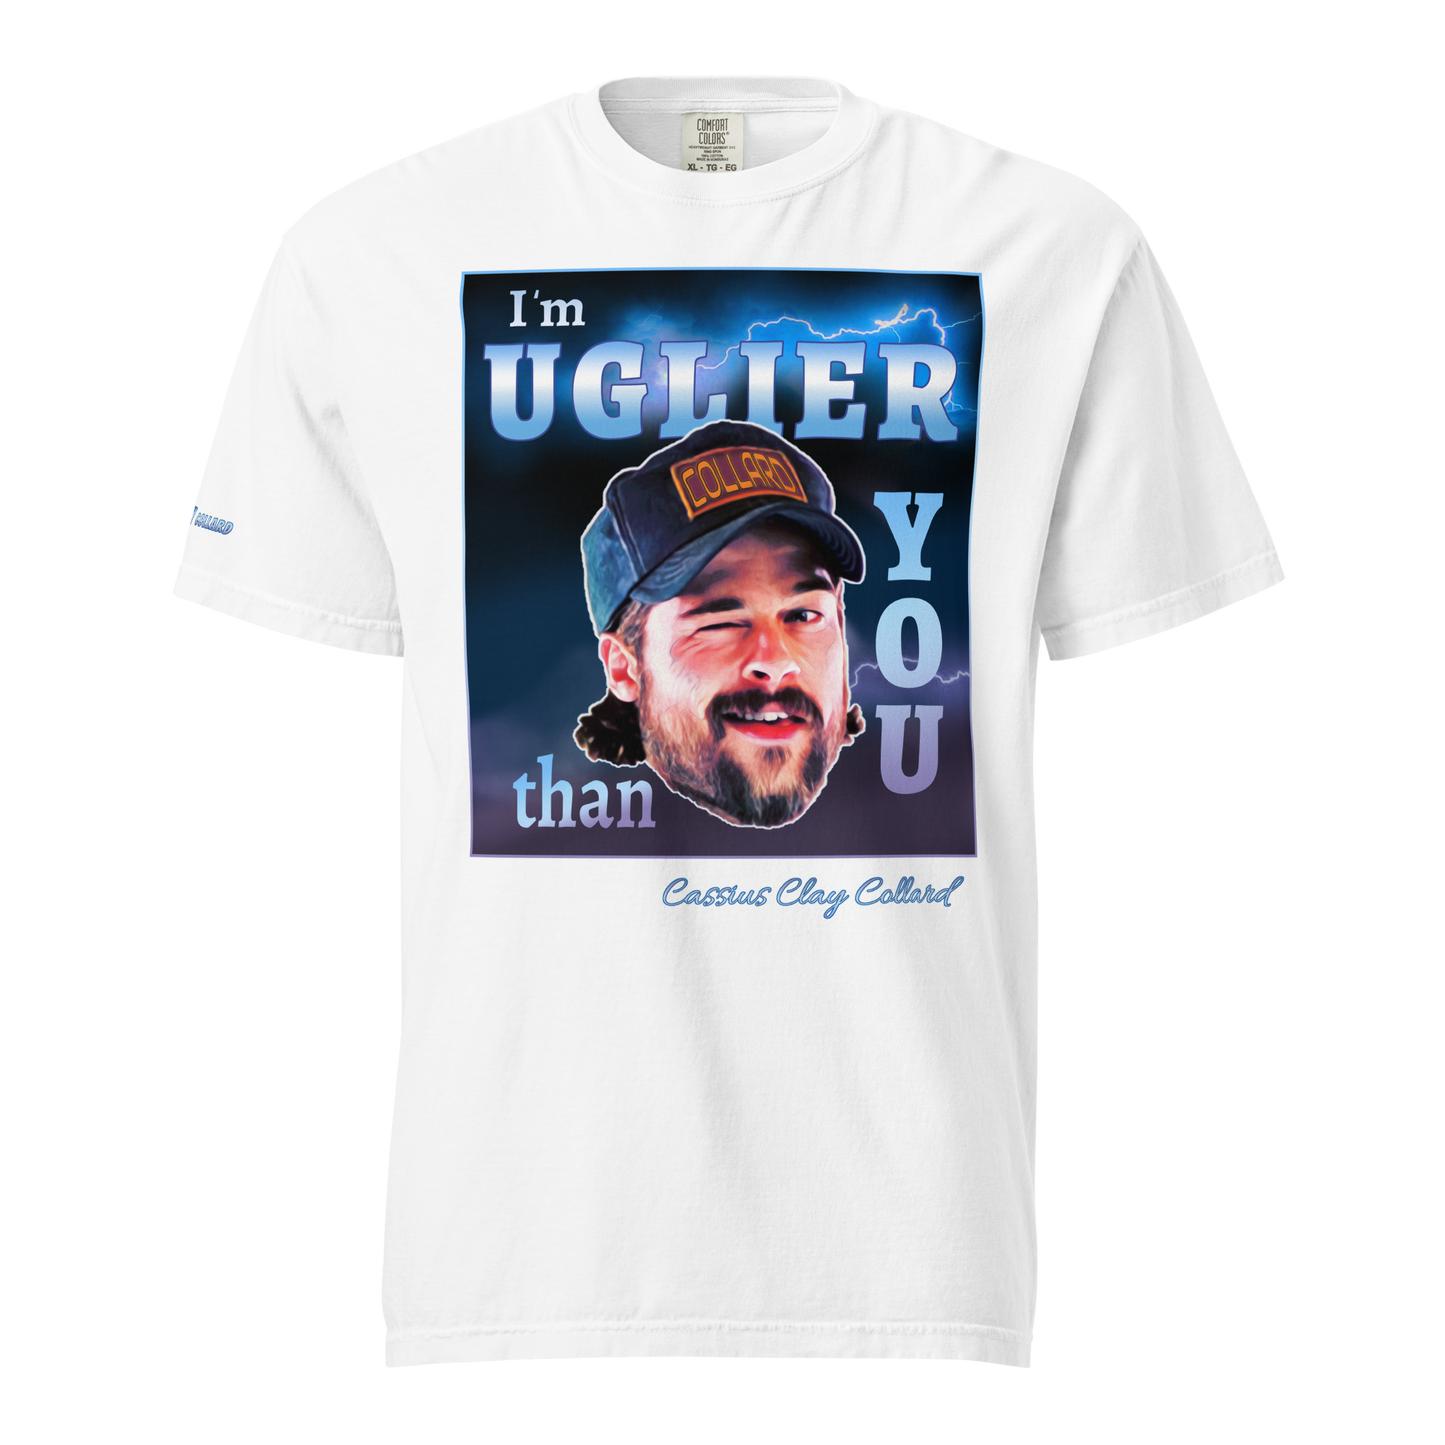 Cassius Clay Collard "I'm Uglier than You" T-Shirt STYLE 2 - southspace